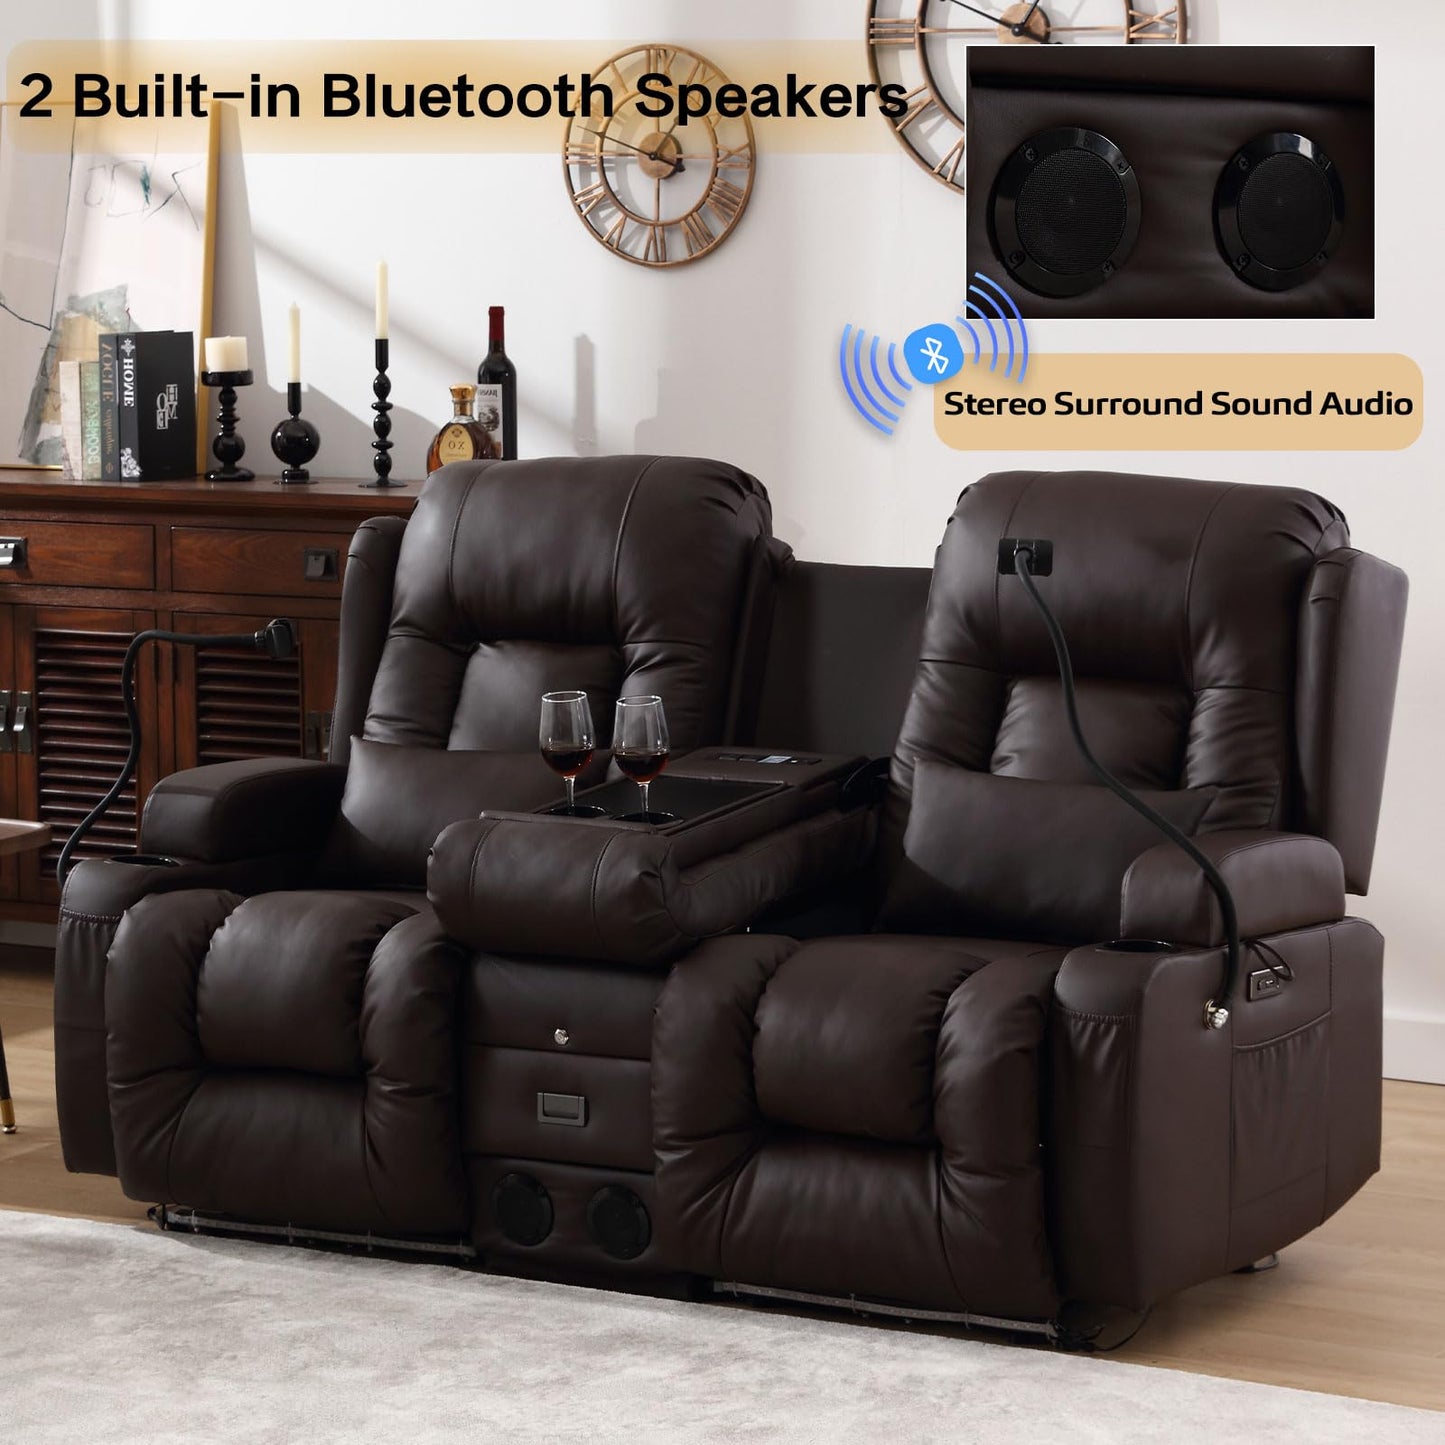 URRED Power Loveseat Recliner Sofa, PU Leather Home Theater Seating with LED Ambient Light, Double Recliner RV Sofa with Flipped Middle Backrest/Bluetooth Speakers/USB/Built-in Outlets, Brown